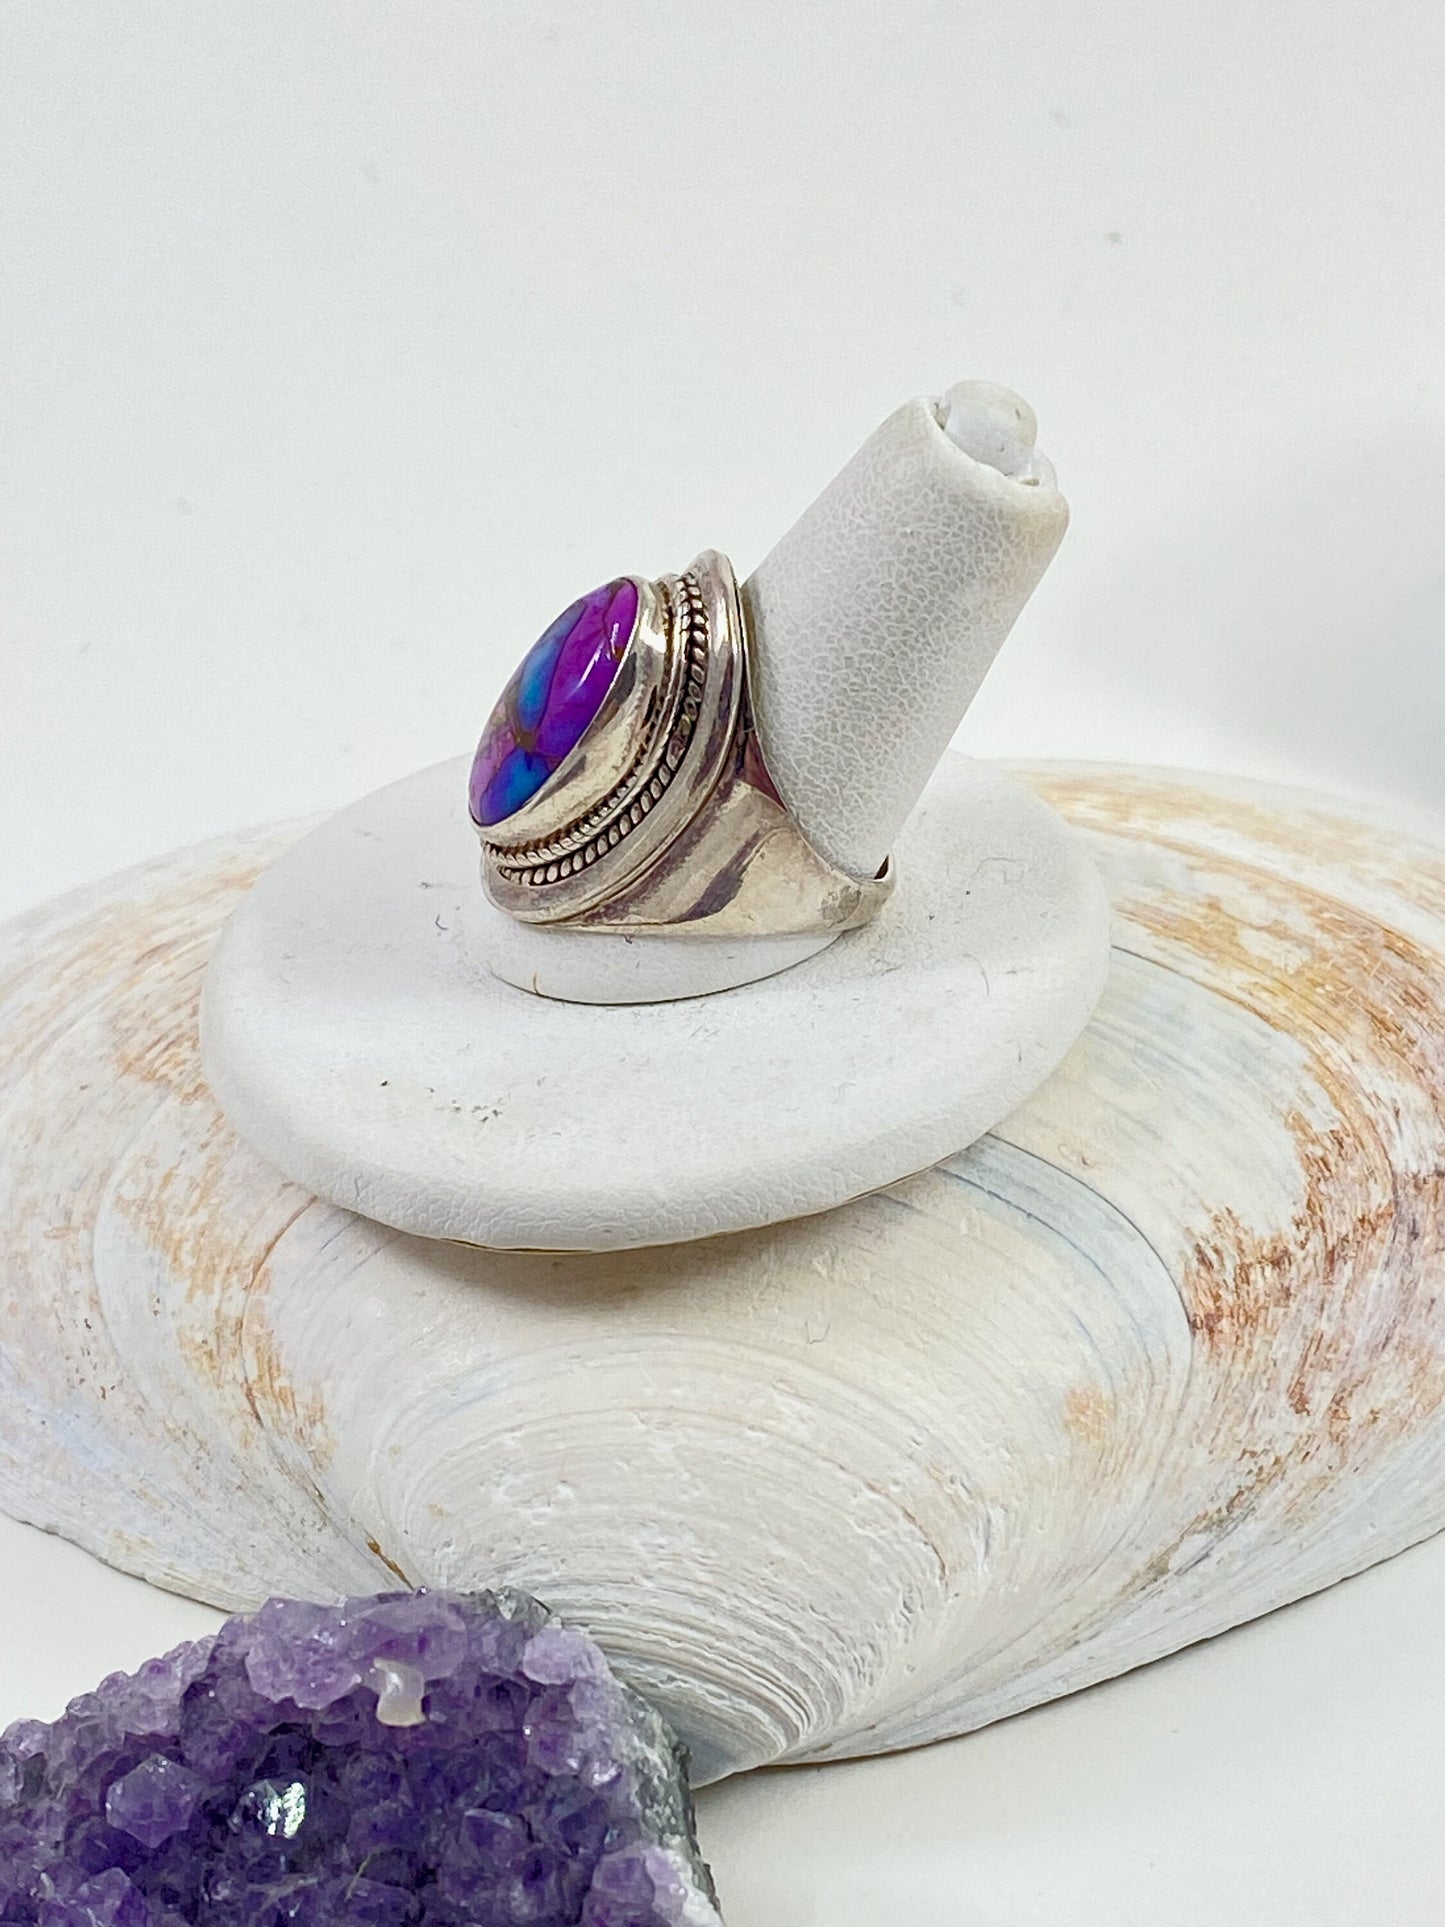 Gorgeous handmade purple, blue and copper turquoise and sterling silver ring. This is a size 6 stunning ring.